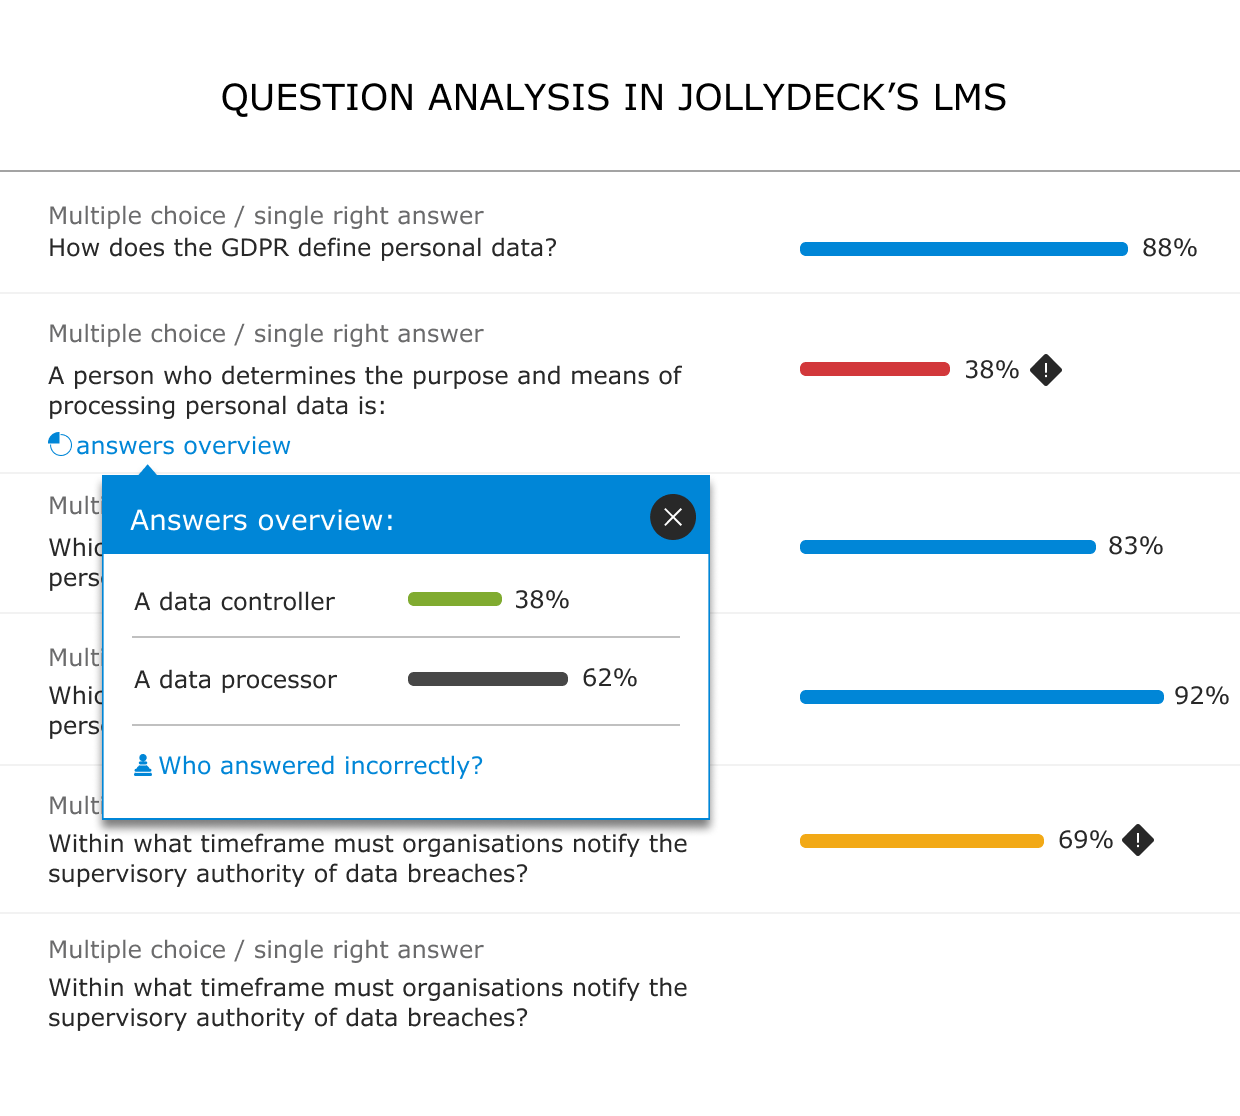 Learning analytics used to identify knowledge gaps in JollyDeck’s LMS